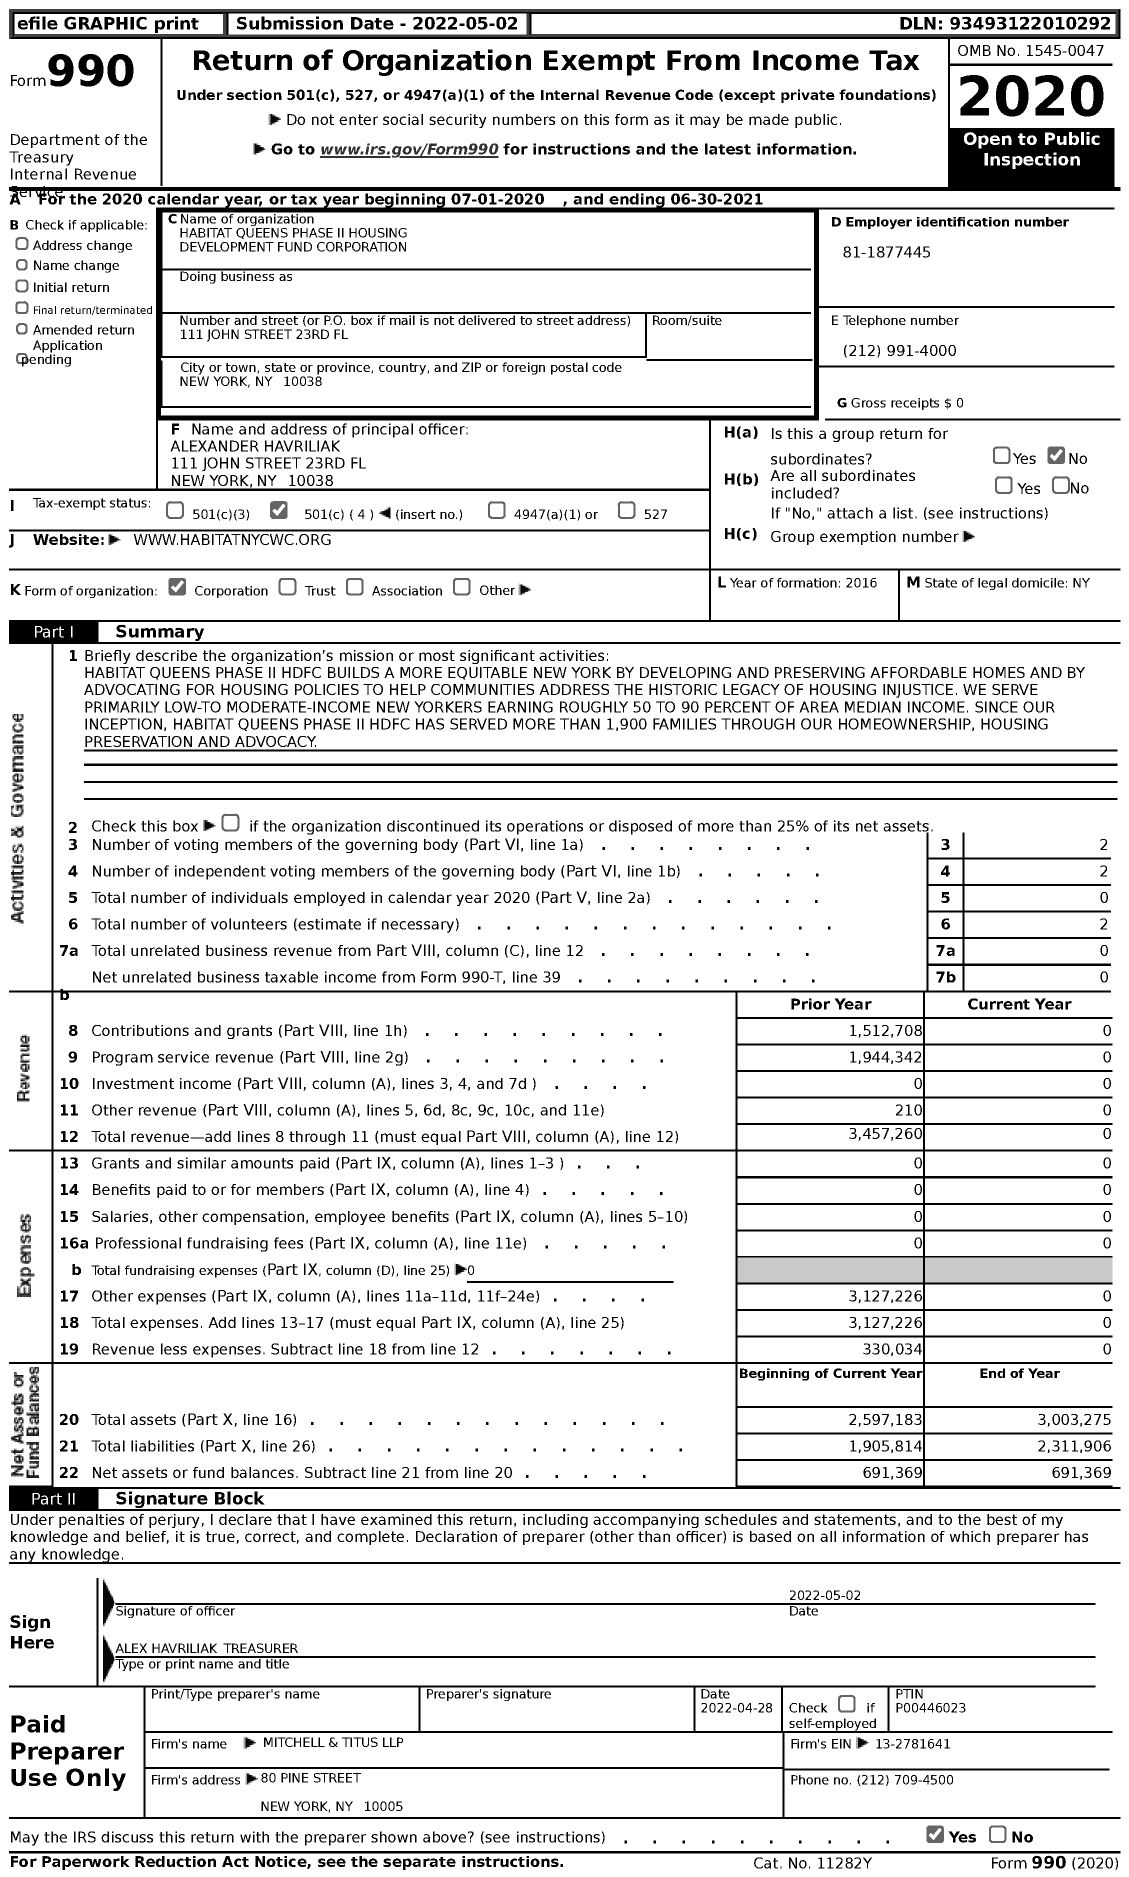 Image of first page of 2020 Form 990 for Habitat Queens Phase Ii Housing Development Fund Corporation